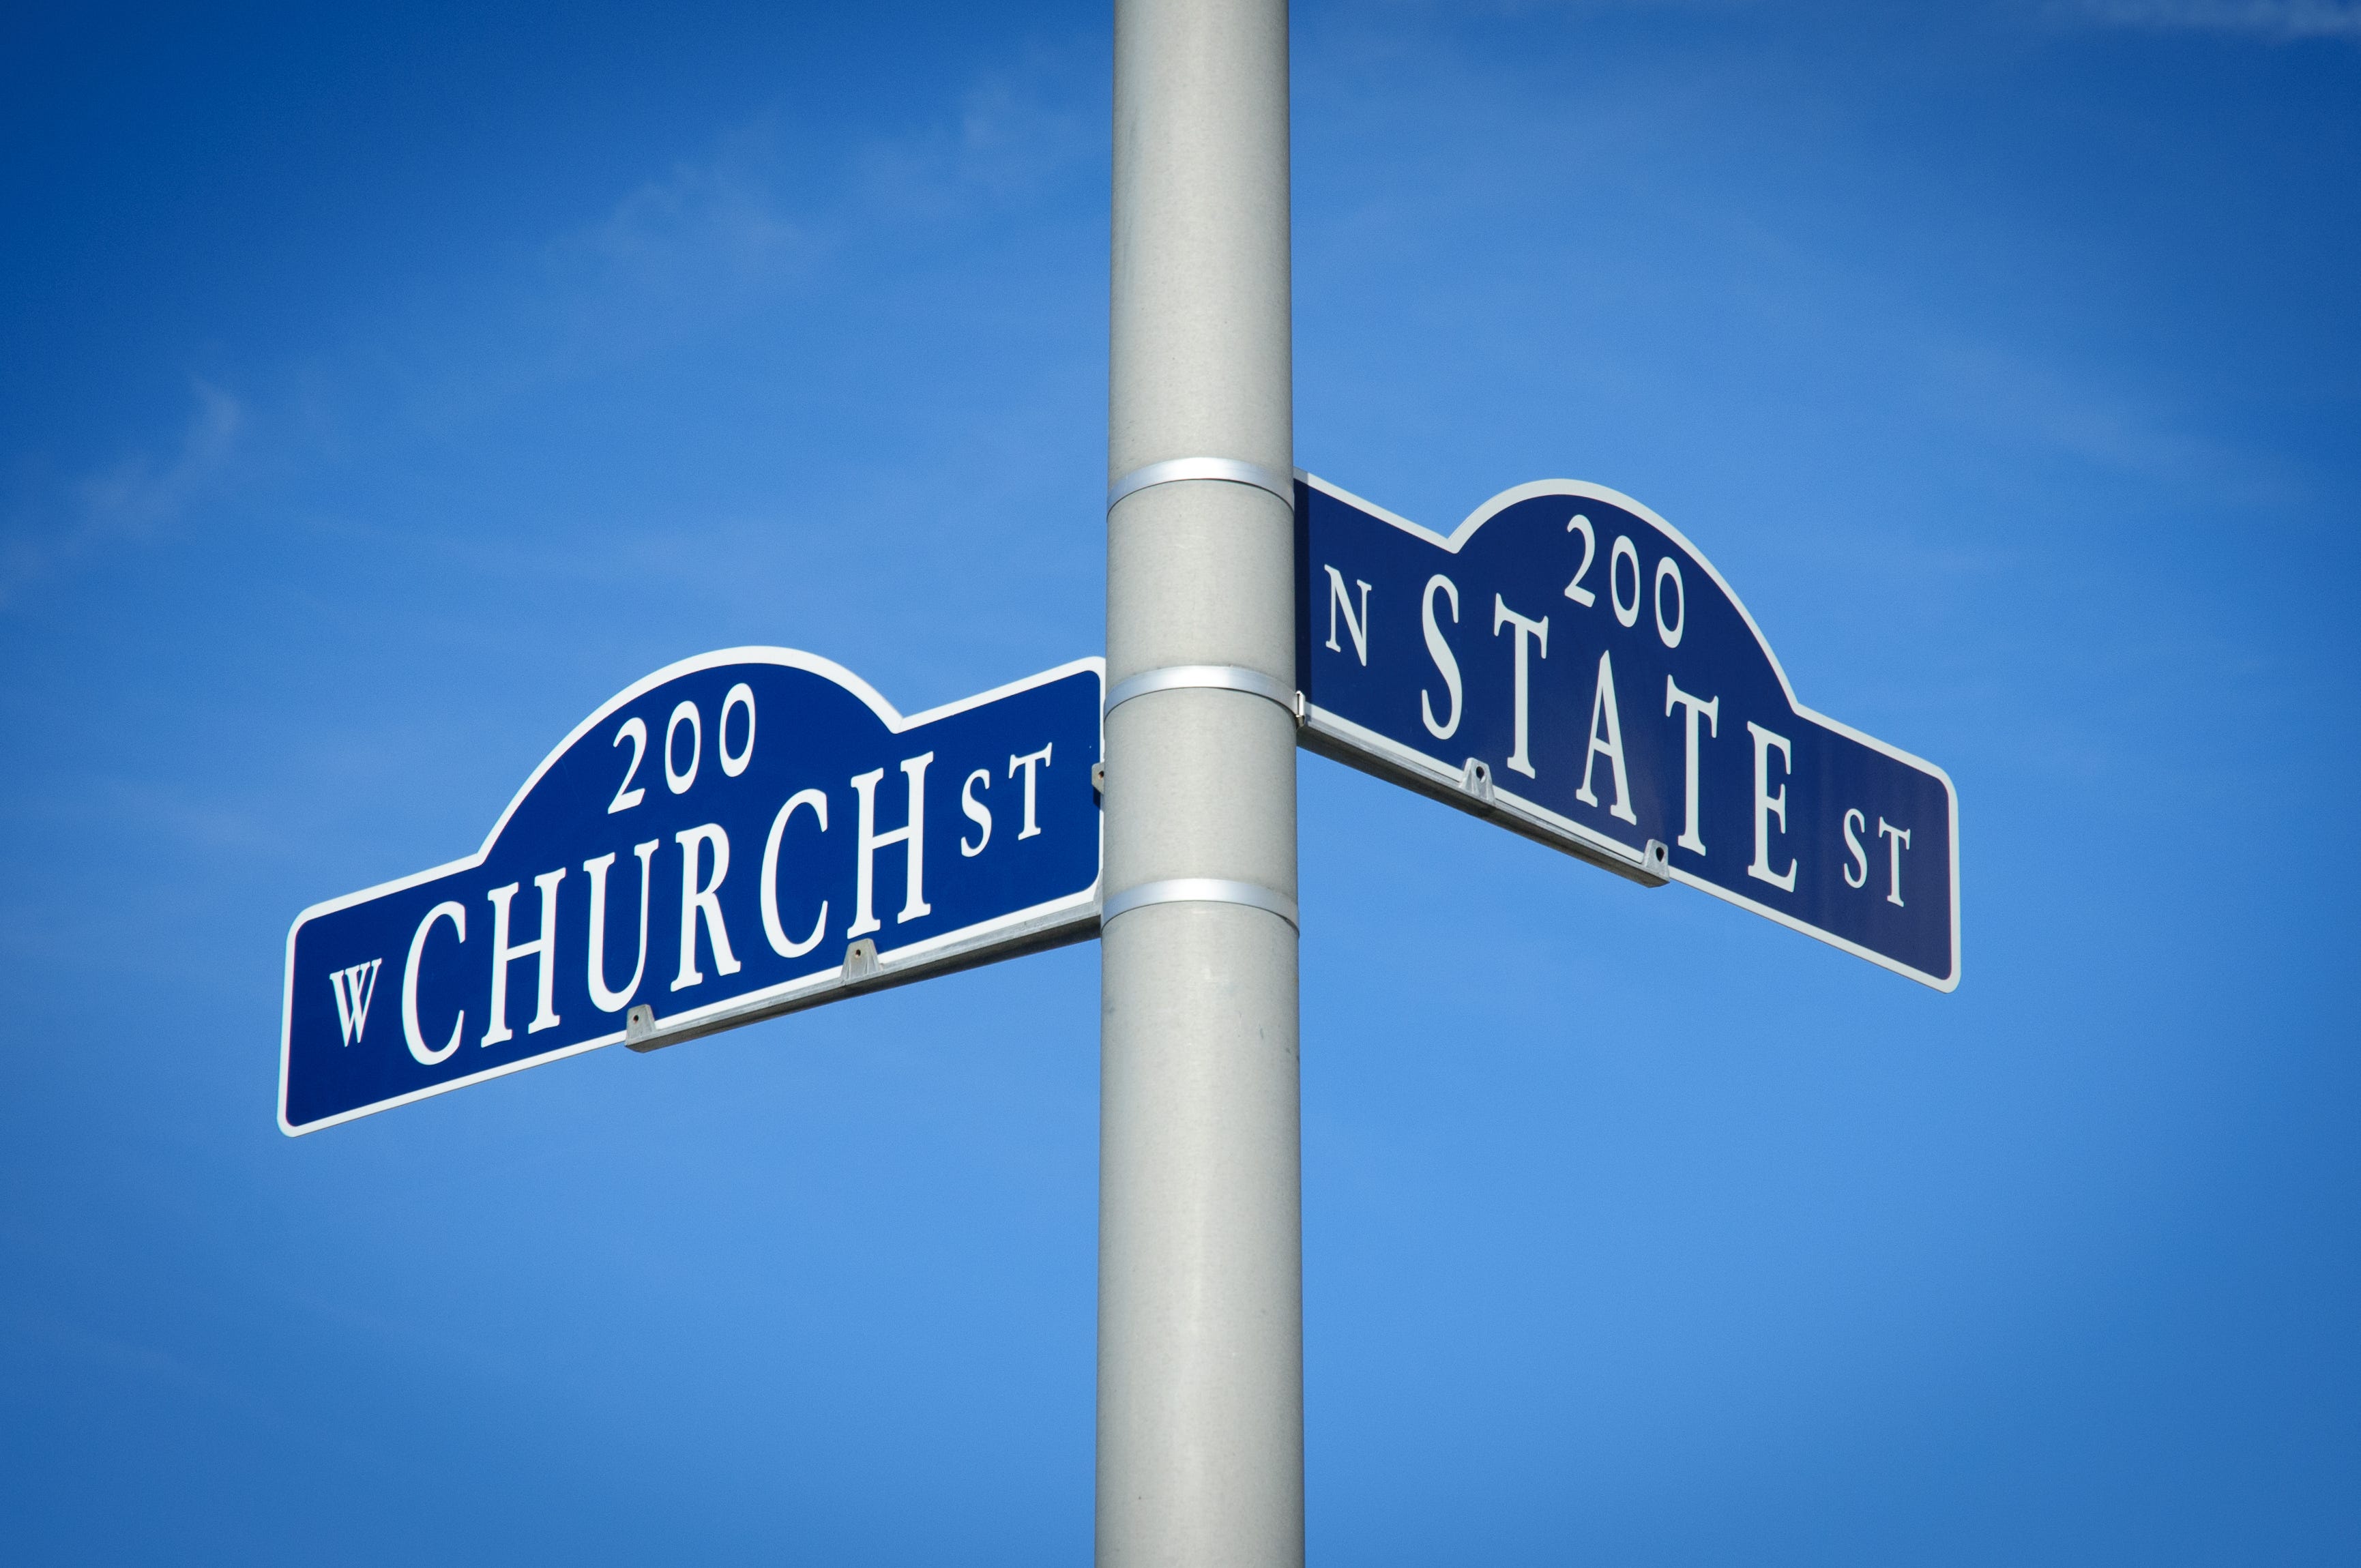 The Intersection of Church & State